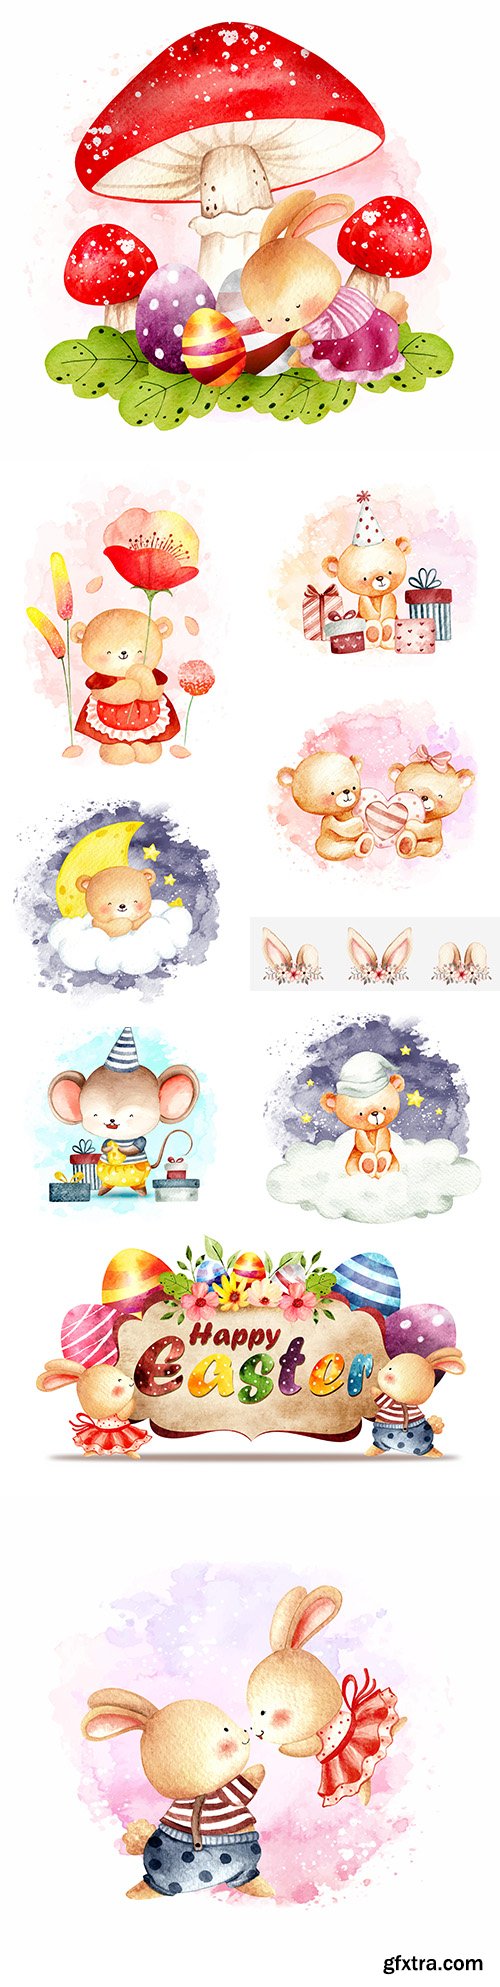 Teddy bear and bunny watercolor illustrations
